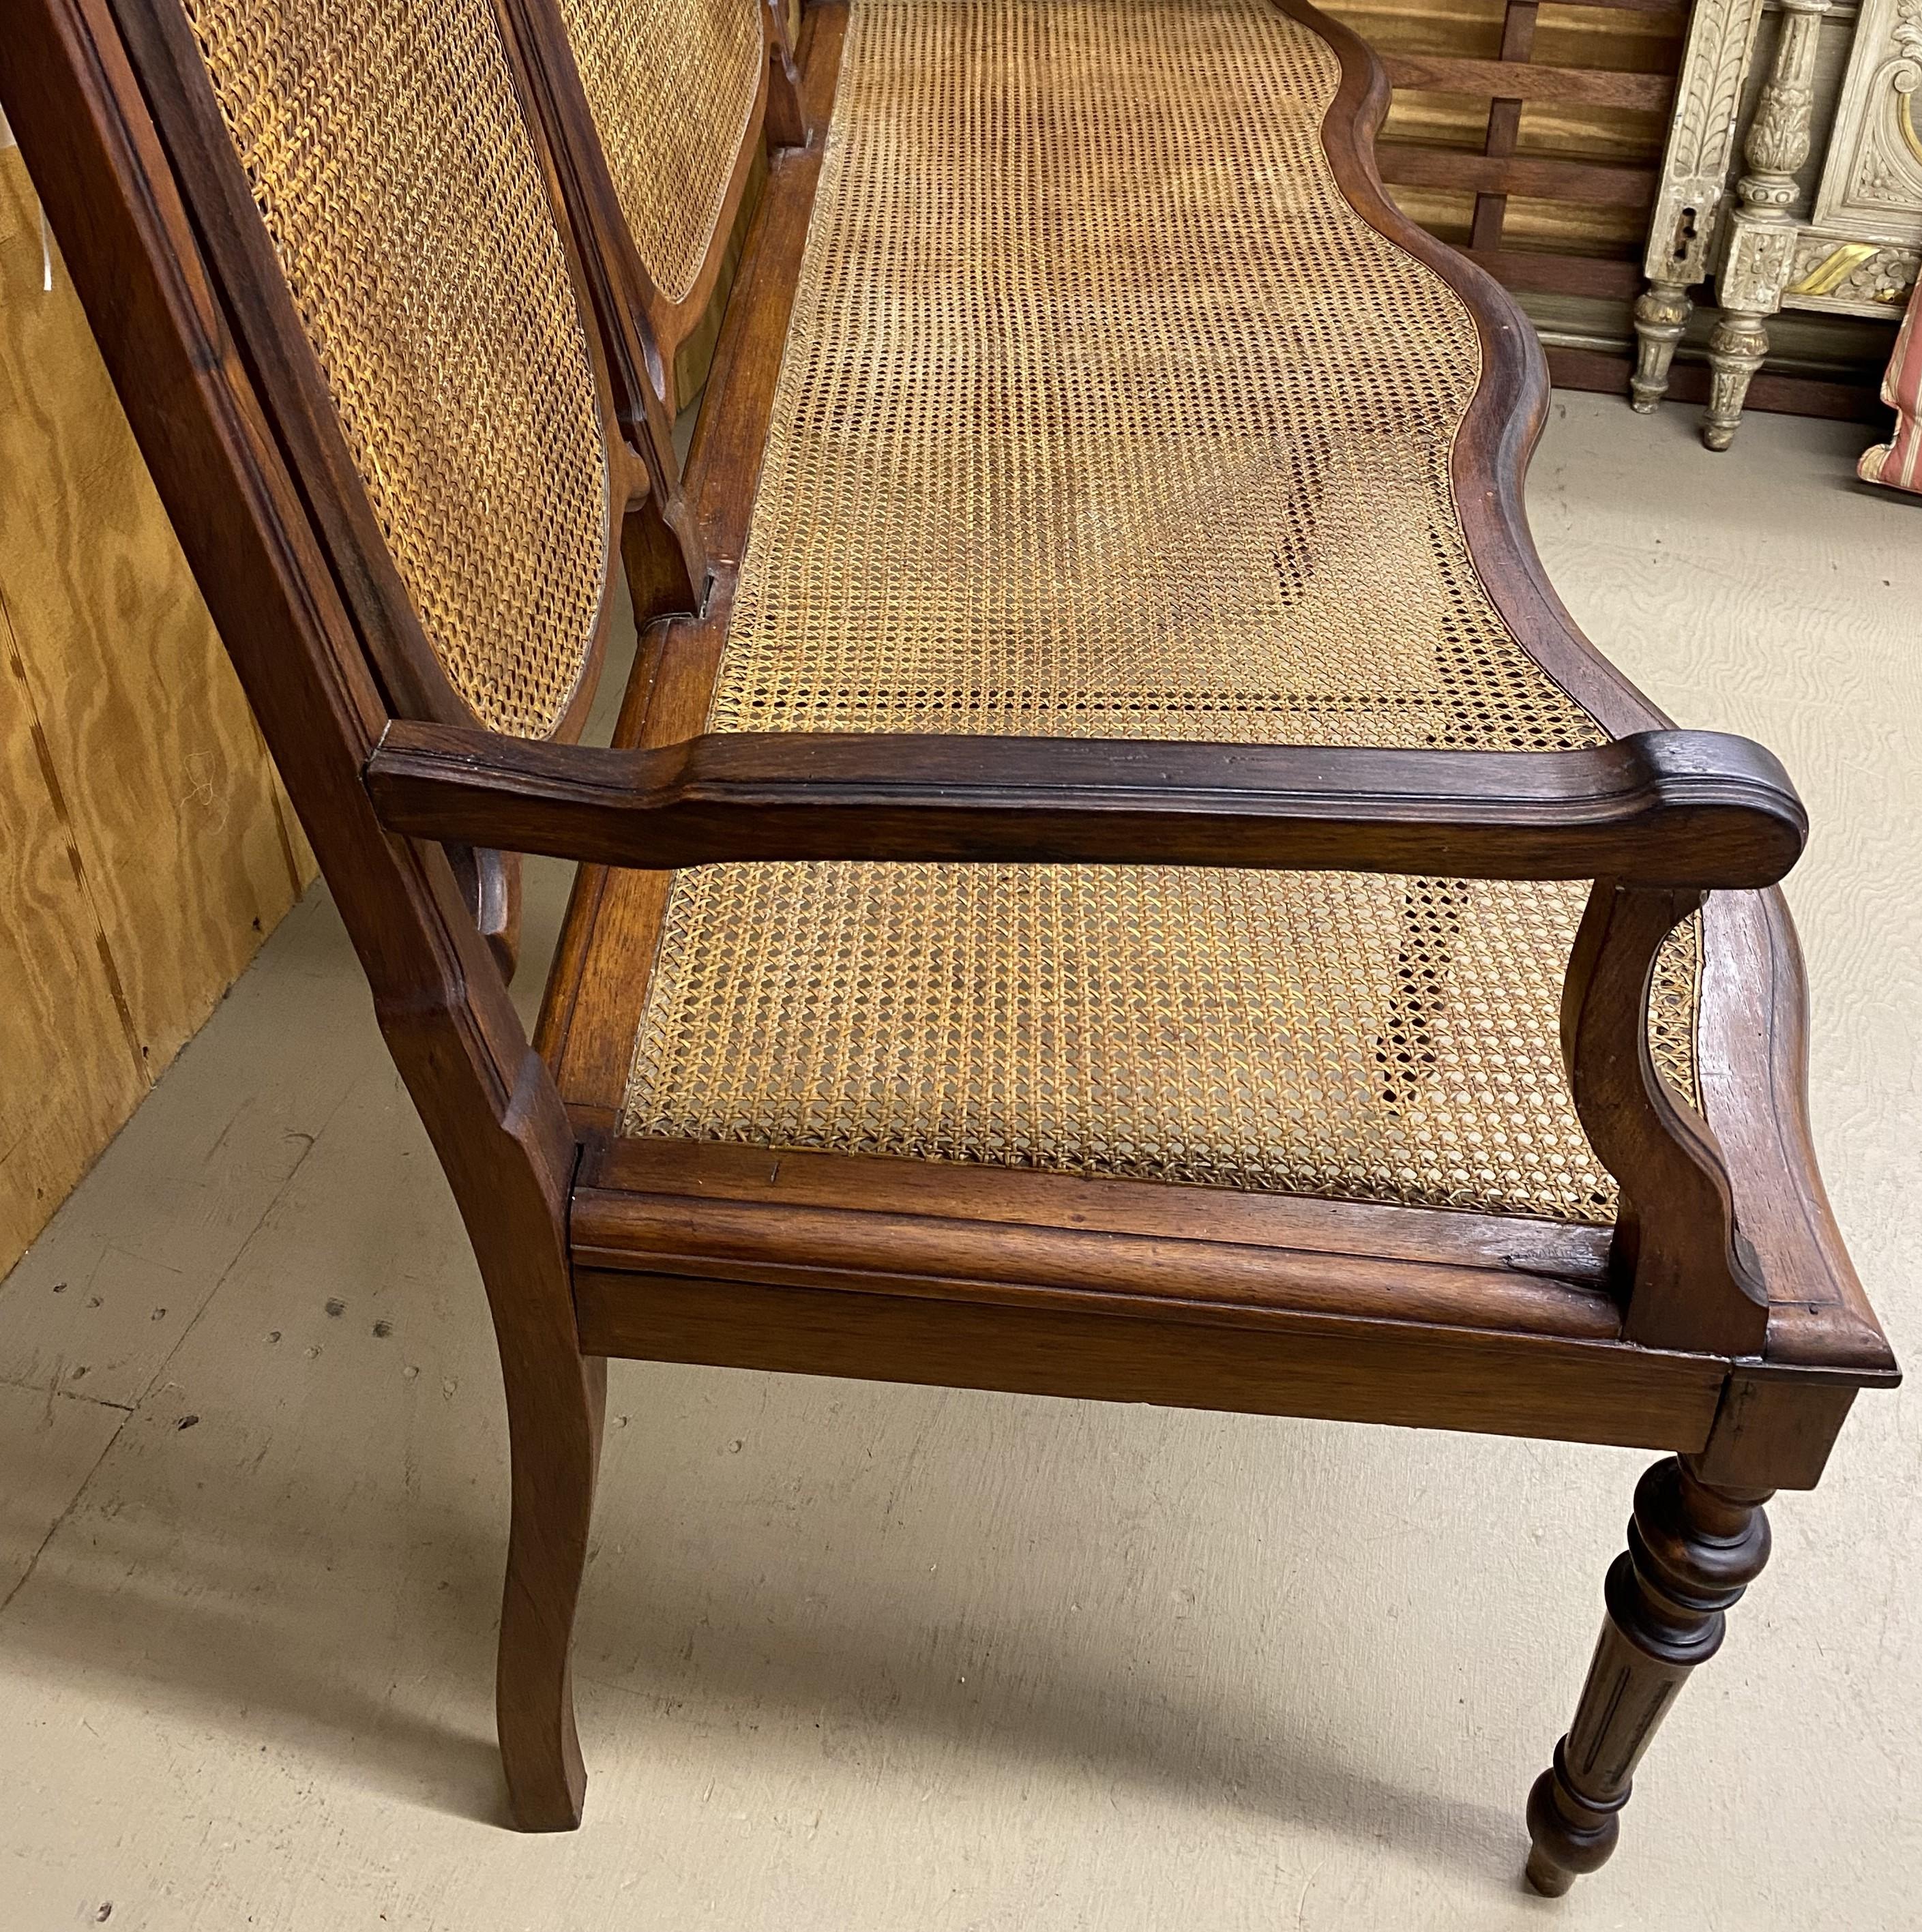 19th Century 19th c Brazilian Hardwood Settee with Caned Seat and Back For Sale